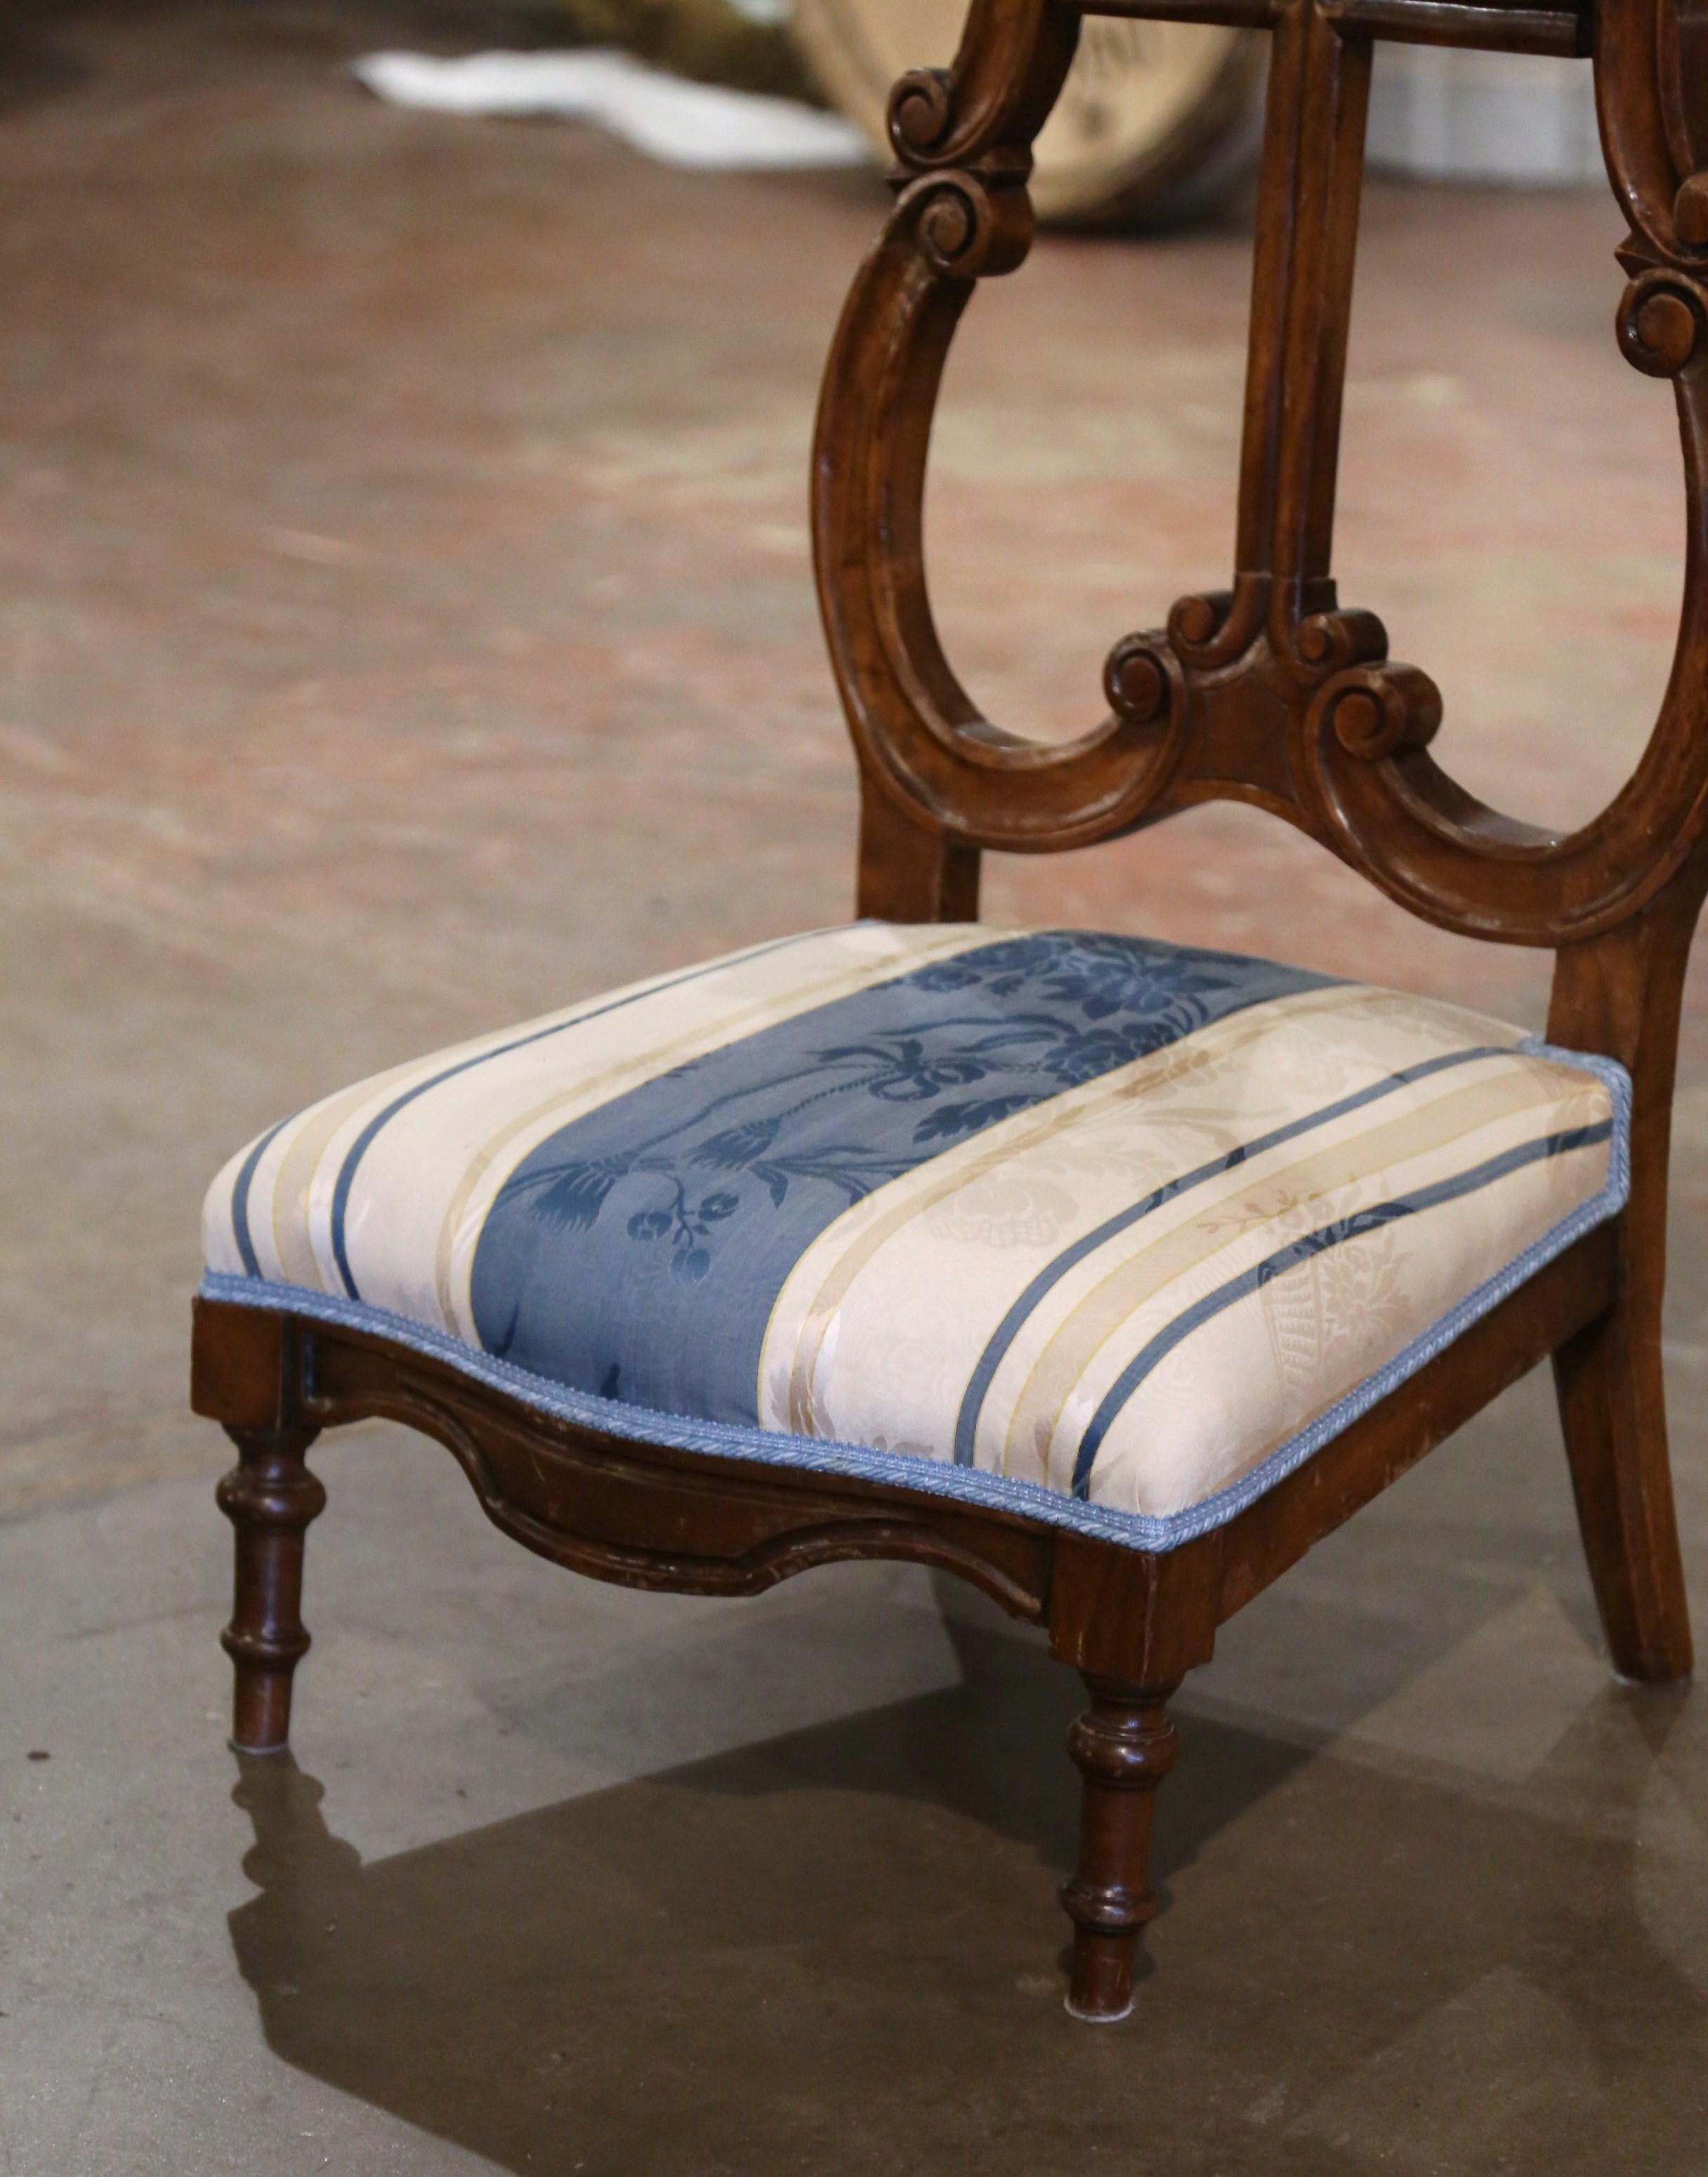 Place this elegant antique prayer chair in a bedroom for your daily devotions. Crafted in France, circa 1960, the traditional kneeler built of walnut, sits on turned legs over a scalloped bombe apron. The chair with a wide and cushioned seat